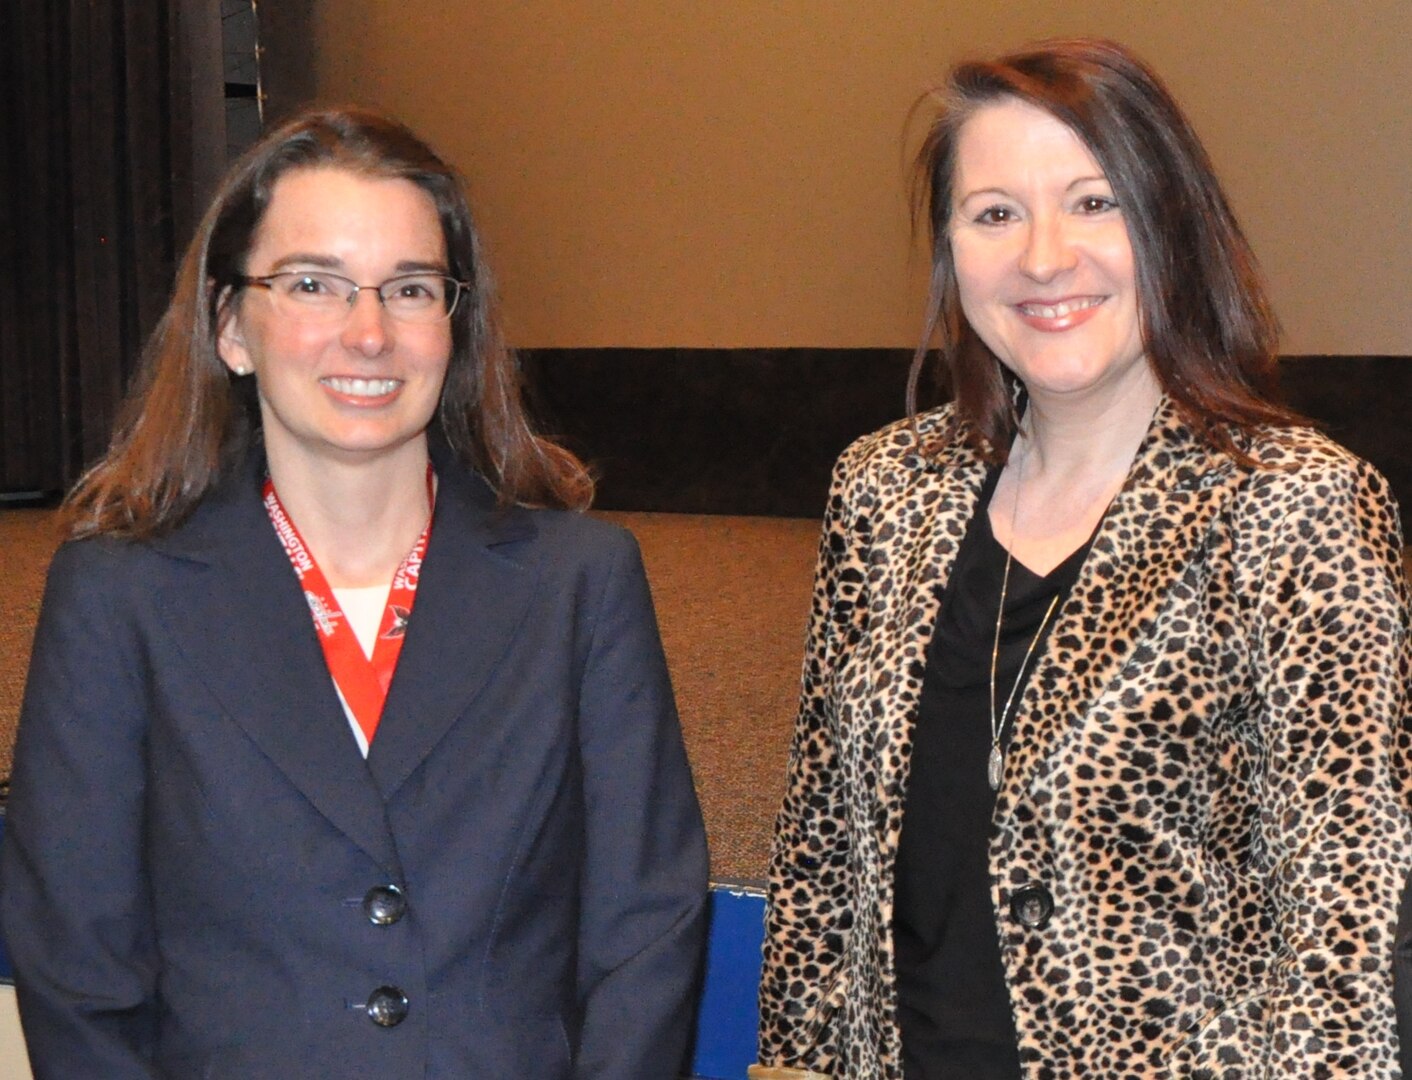 IMAGE: DAHLGREN, Va. (March 26, 2019) – Melanie Lunney, NSWC Dahlgren Division Federal Women’s Program Manager, meets with Amy Markowich, SES, – director of the Integrated Battlespace Simulation and Test Department at the Naval Air Systems Command – who was the keynote speaker at Dahlgren’s 2019 Women’s History Month Observance